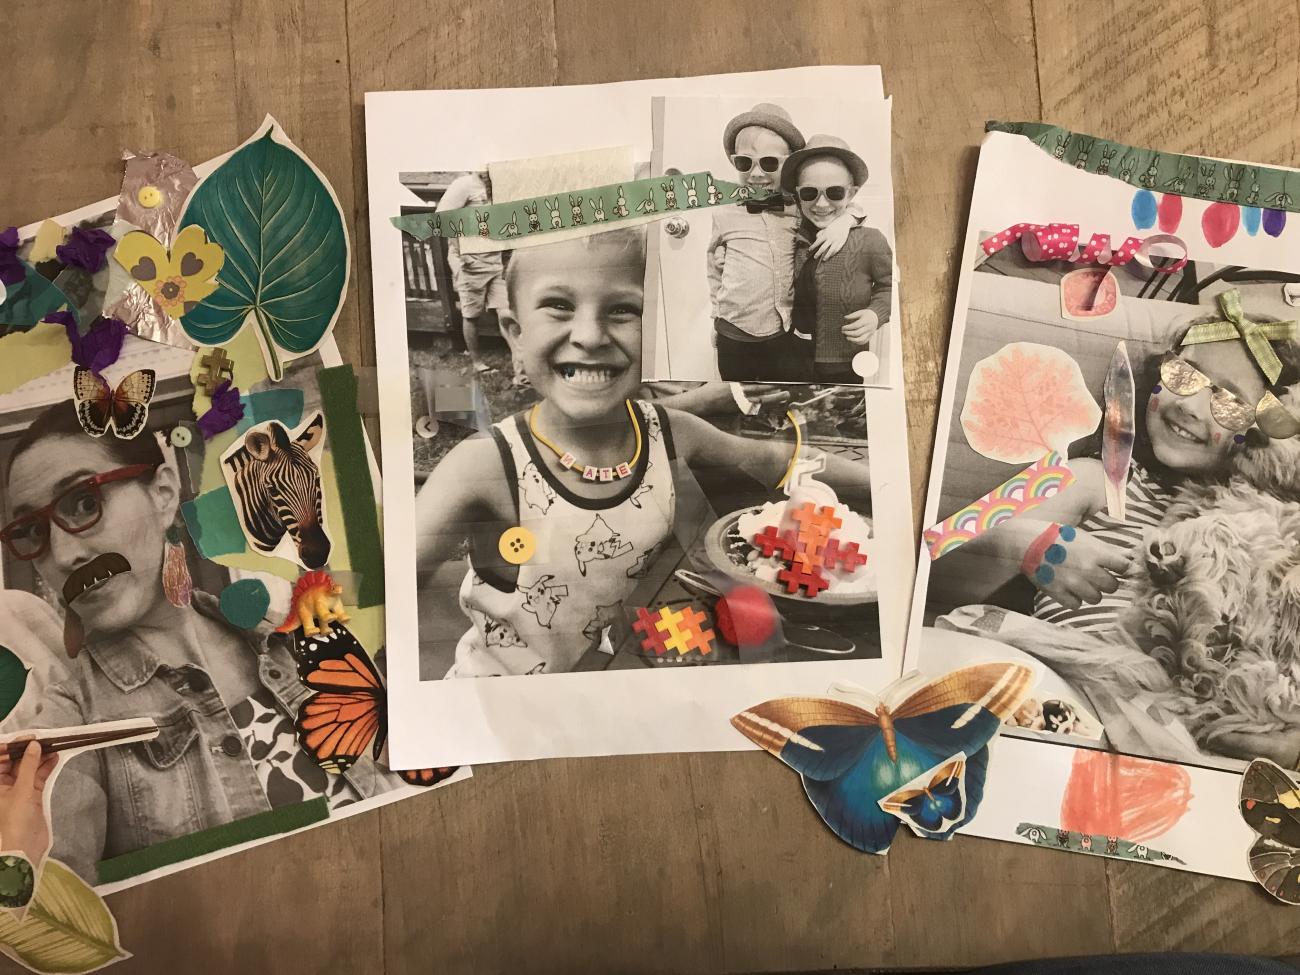 A series of photo collages made by children and the Hirshhorn Museum